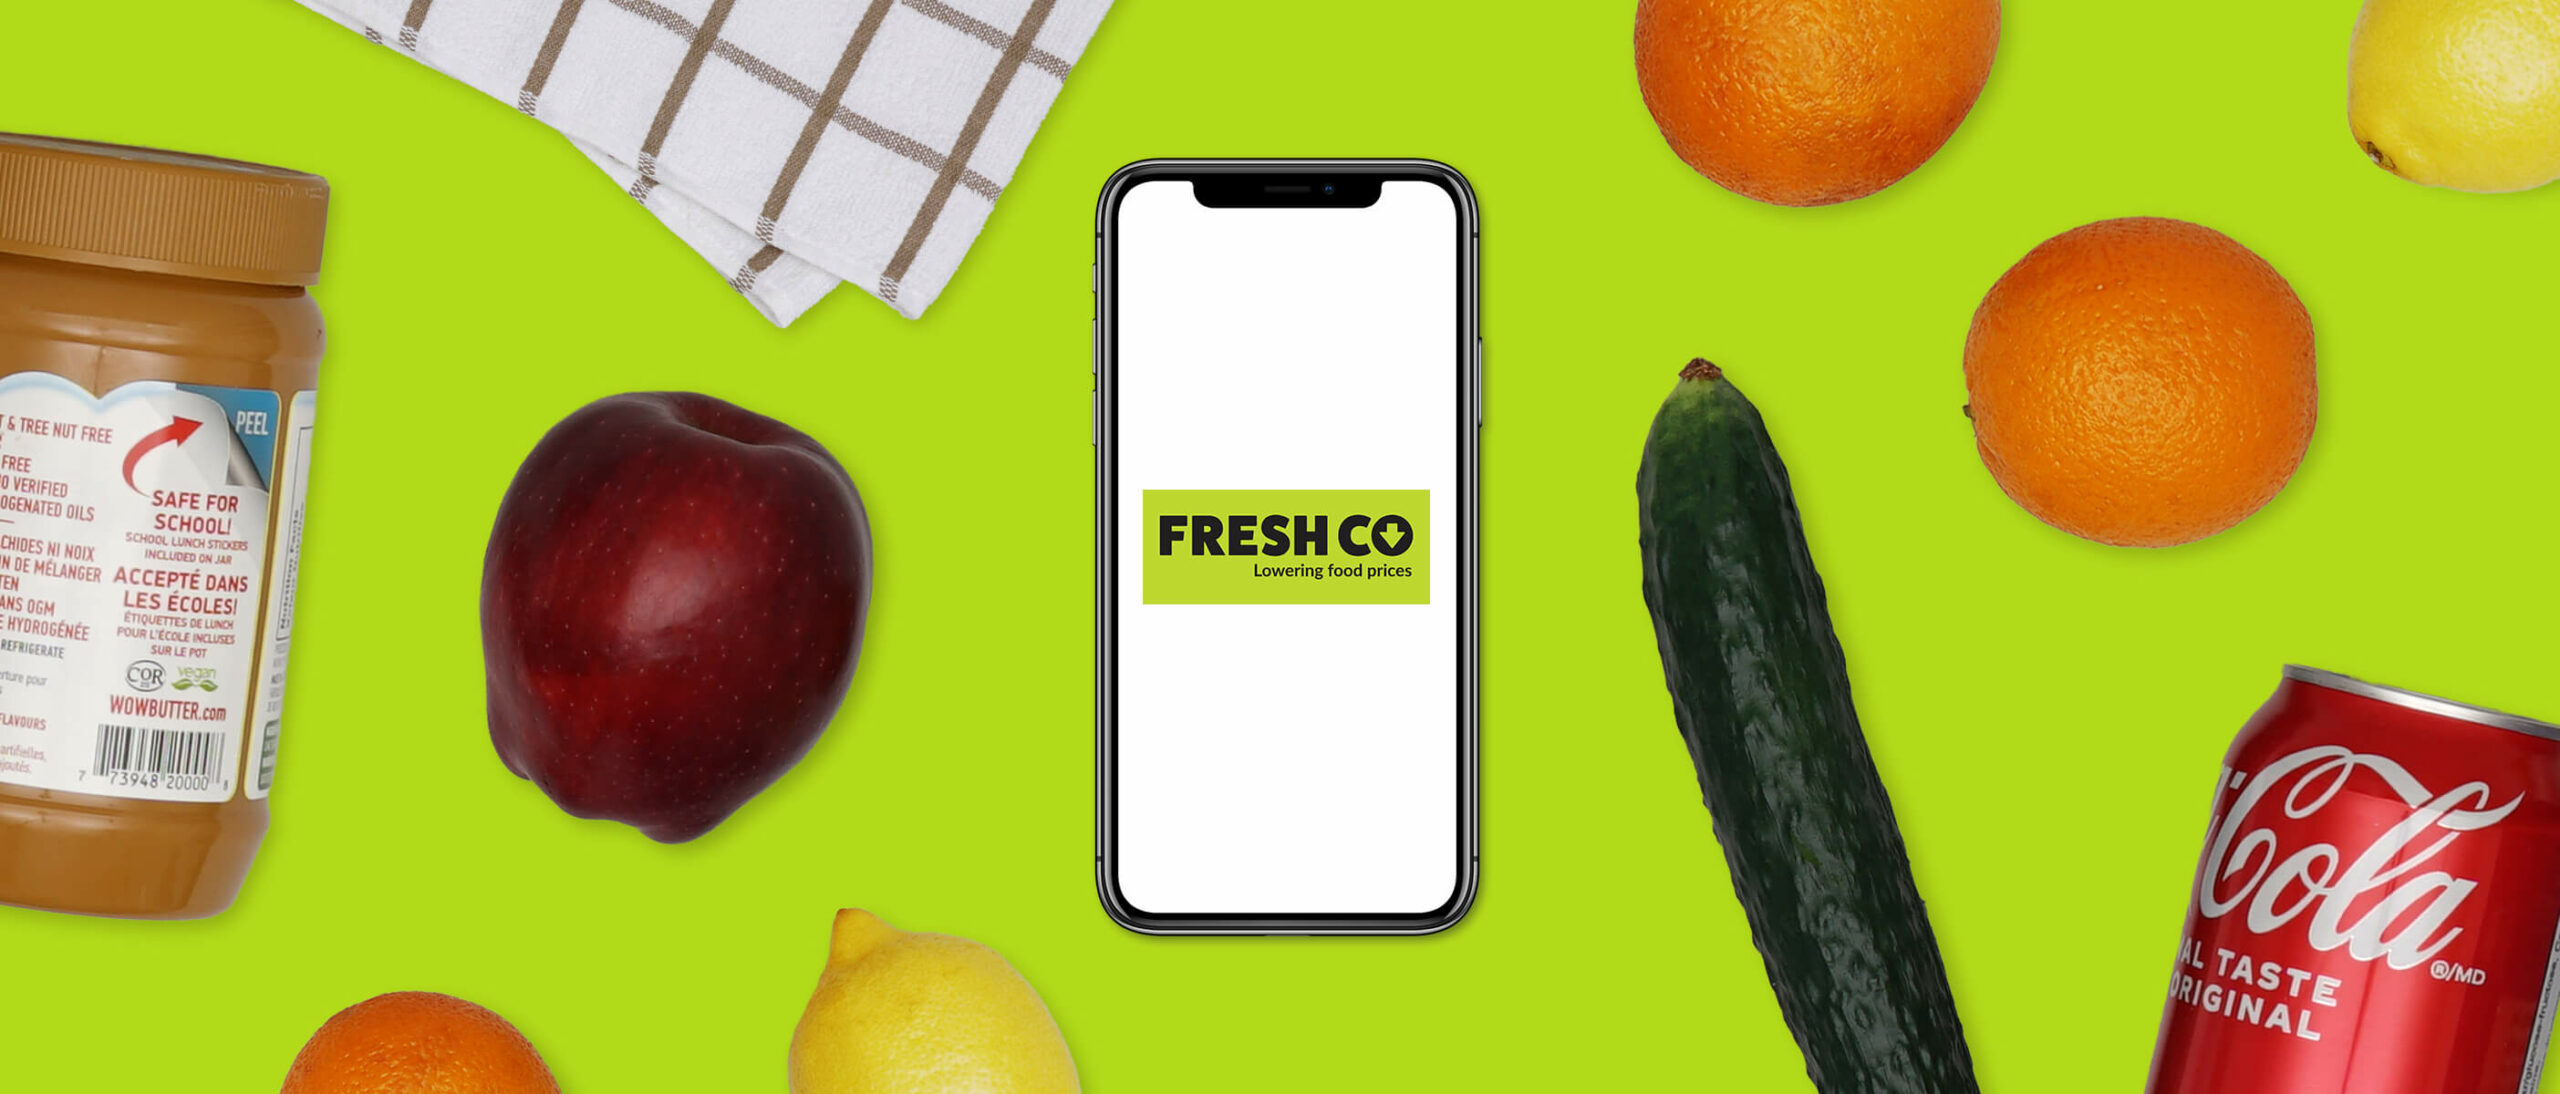 Does FreshCo Price Match? Everything You Need To Know